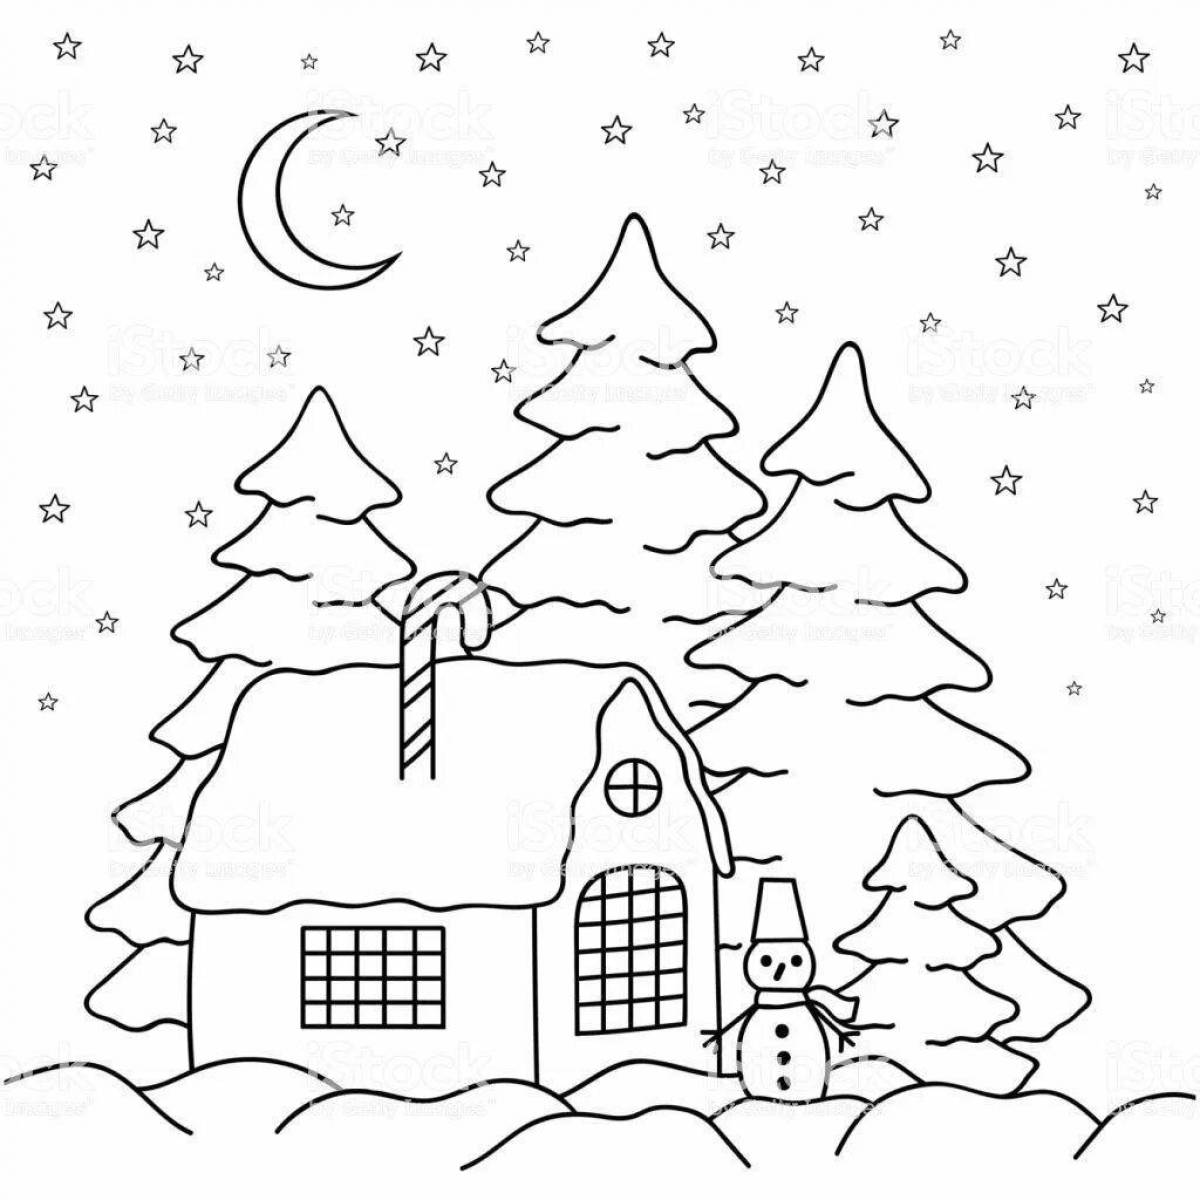 Gorgeous winter landscape coloring book for children 6-7 years old